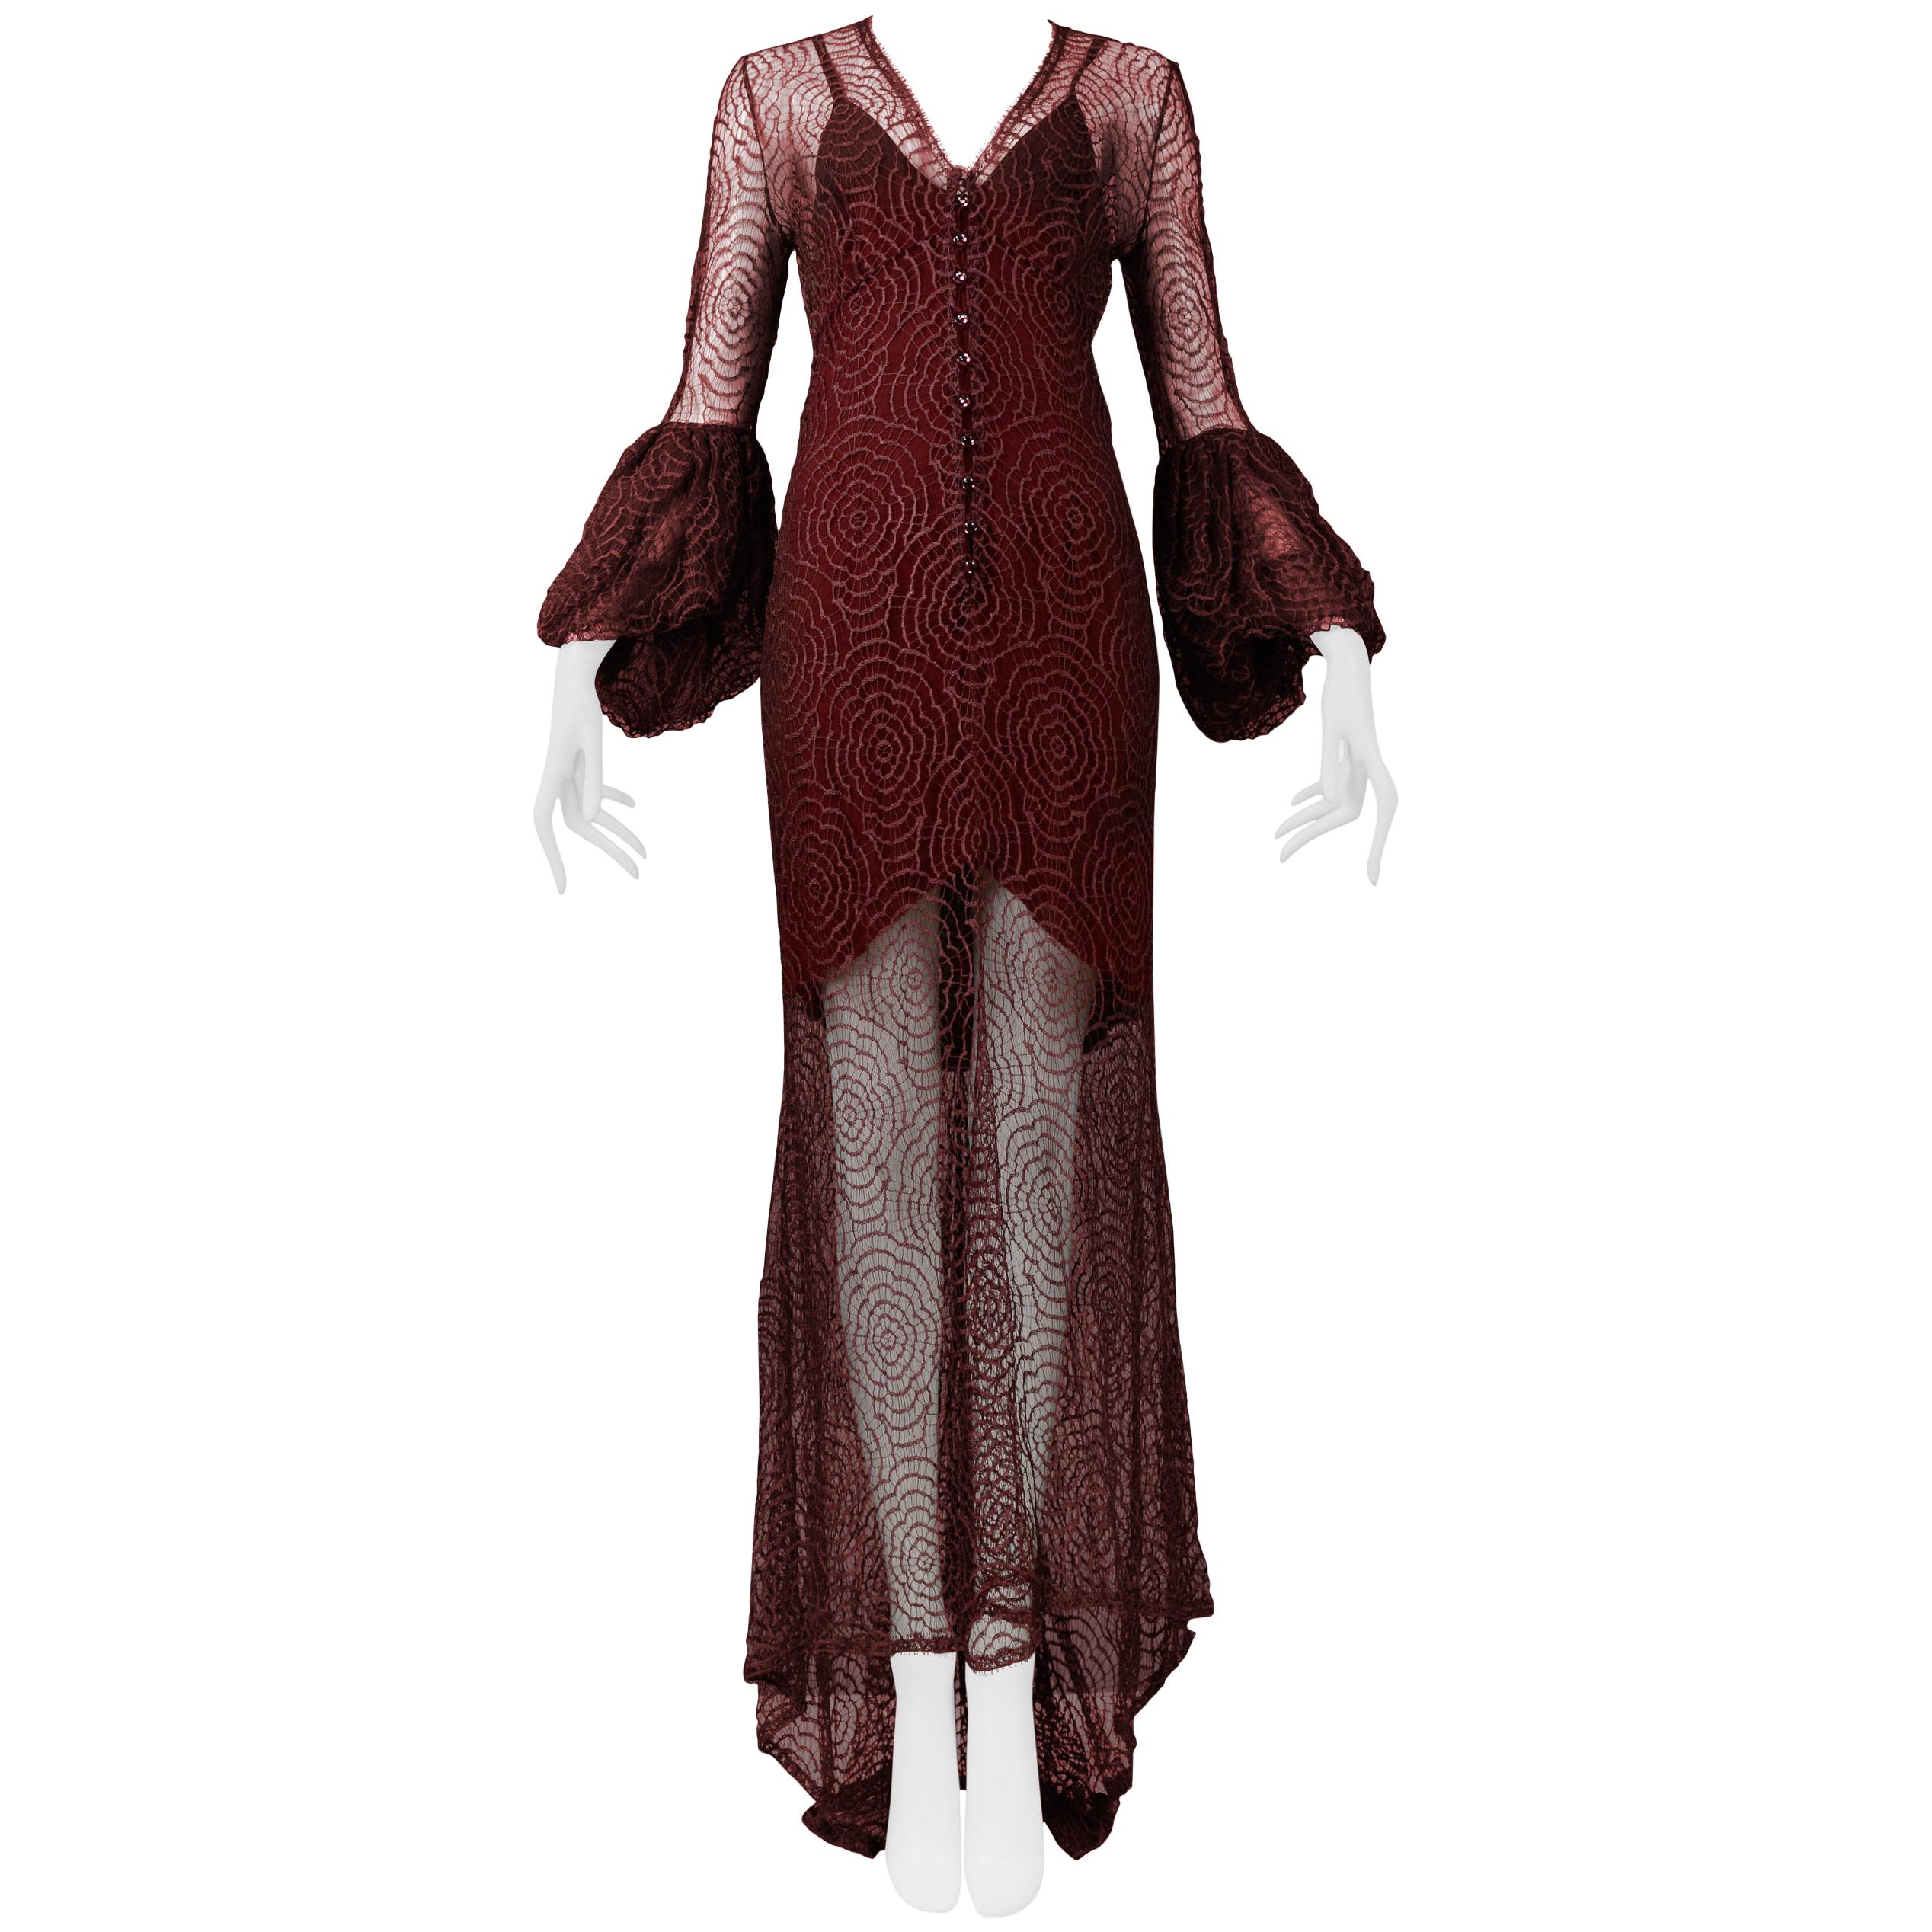 Stunning Chloé by Karl Lagerfeld Burgundy Lace Gown 1997